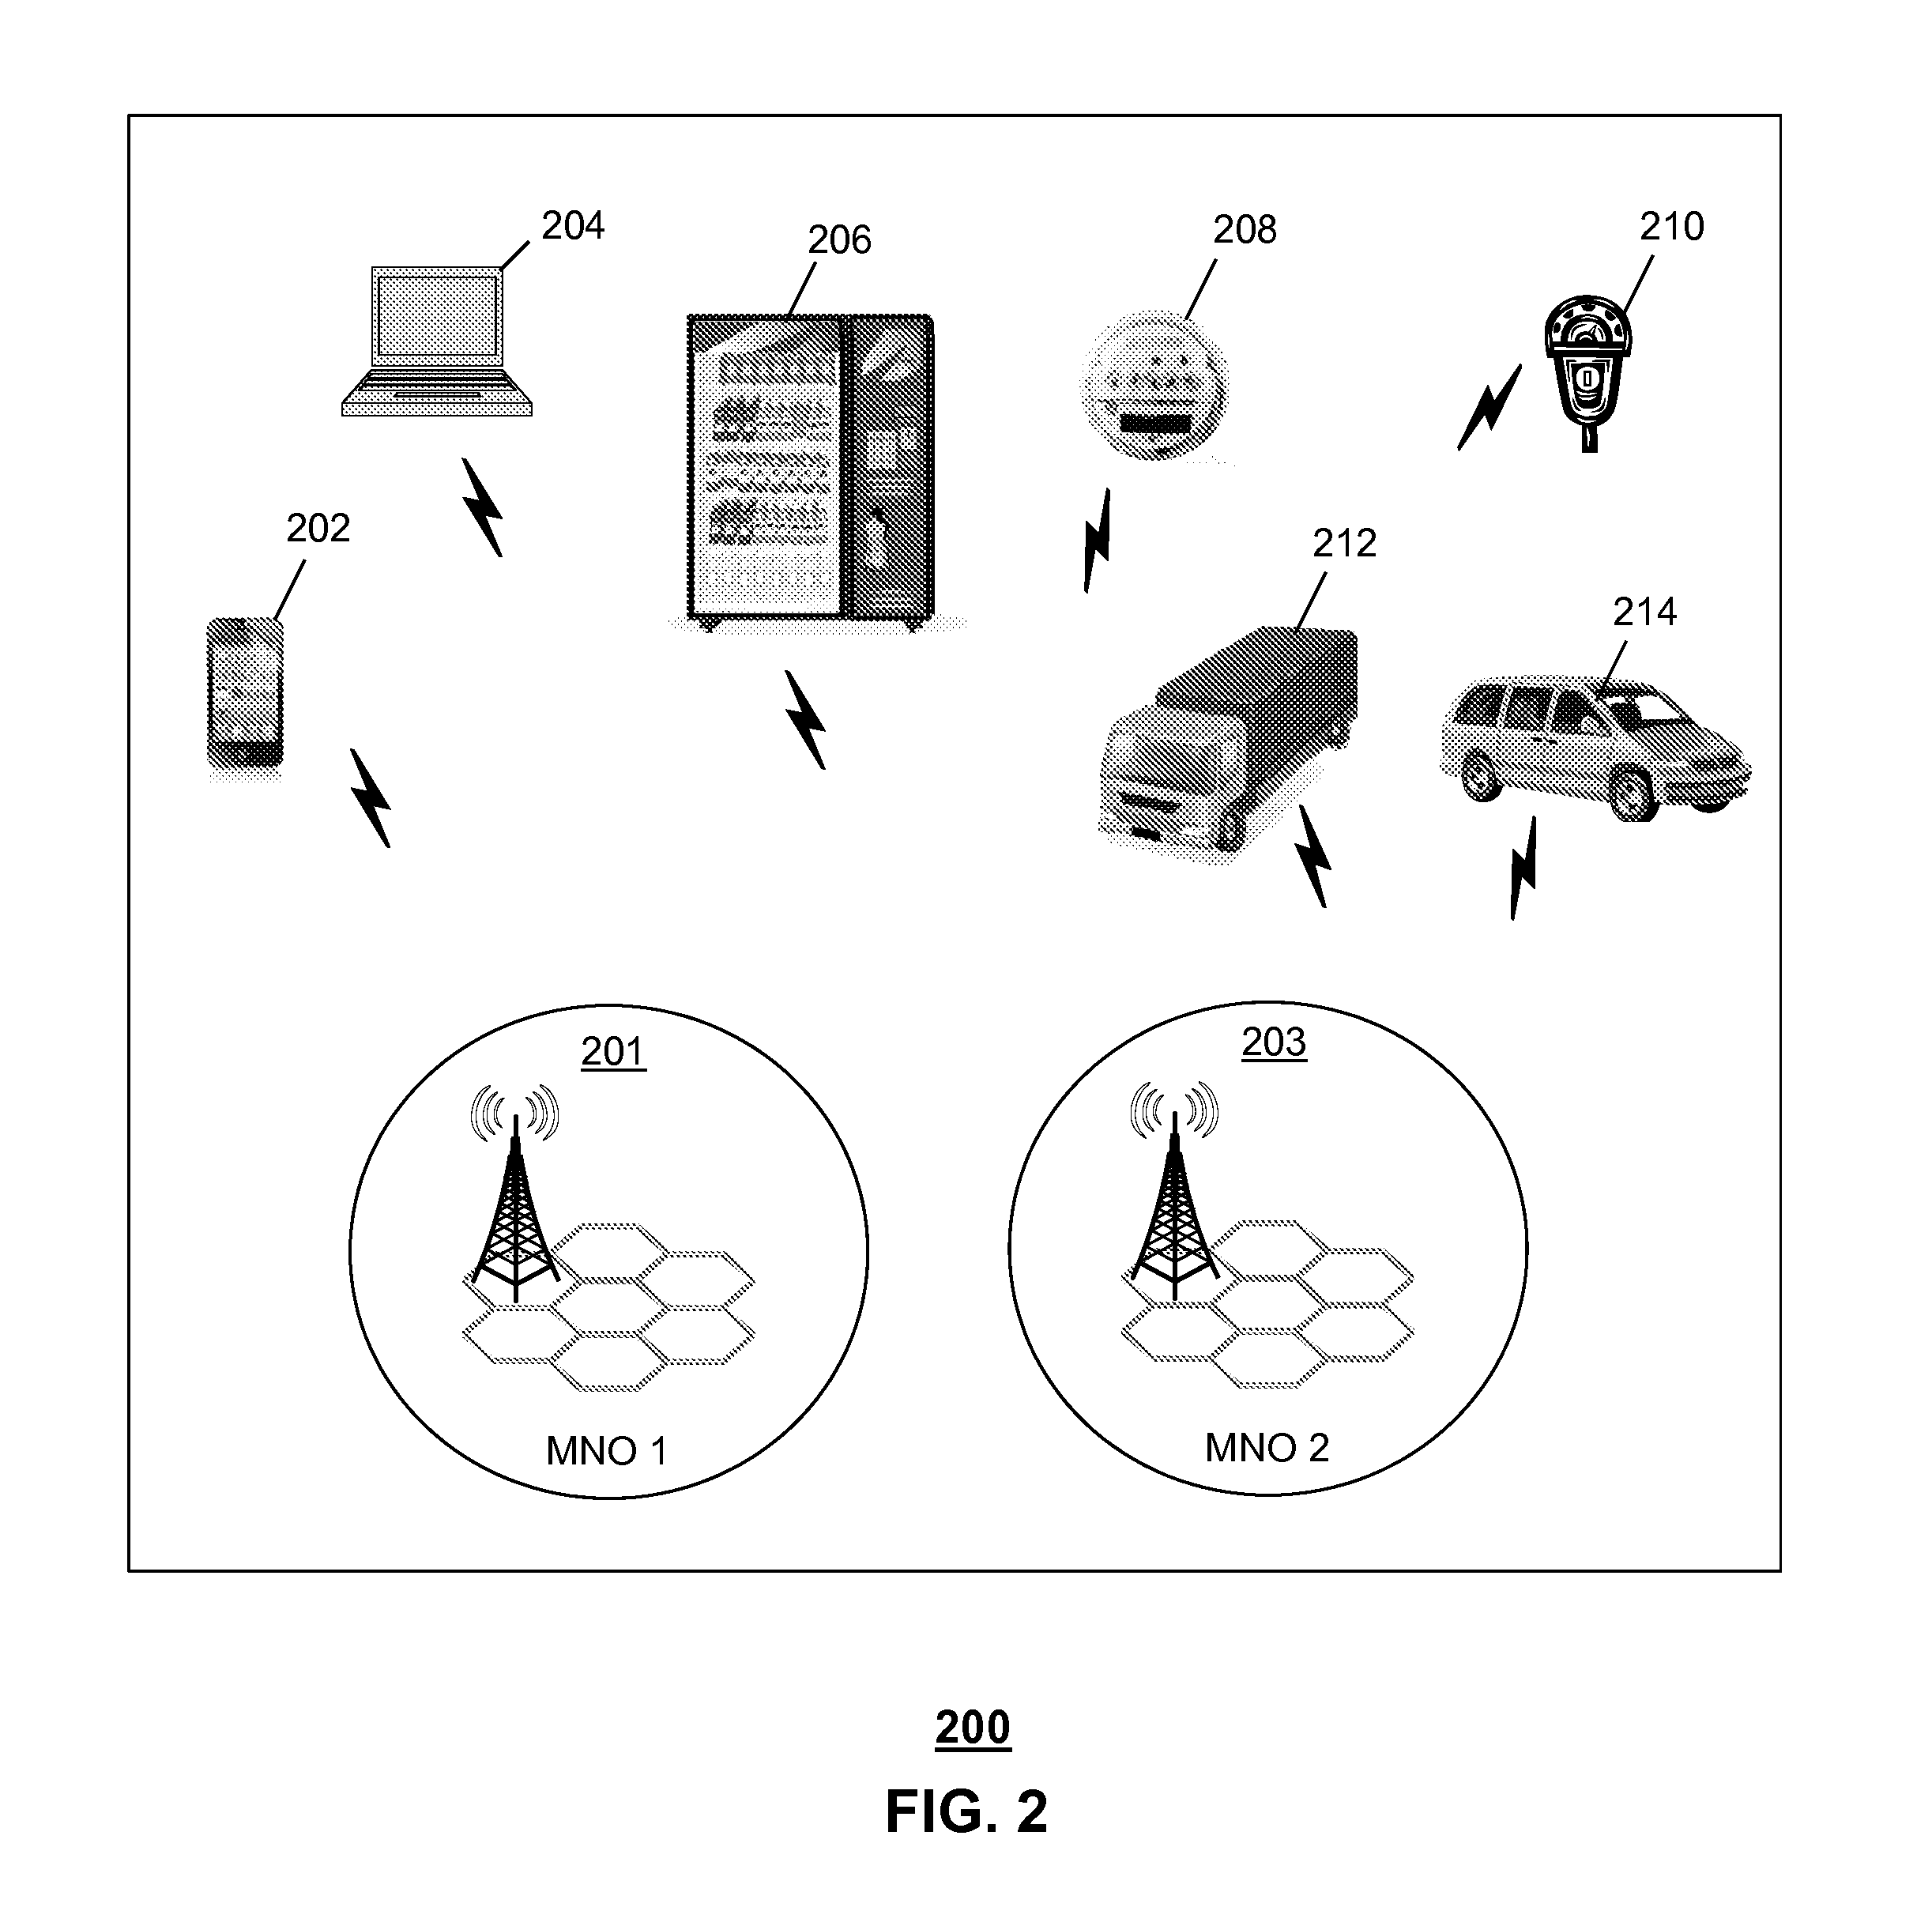 Apparatus and methods for selecting services of mobile network operators